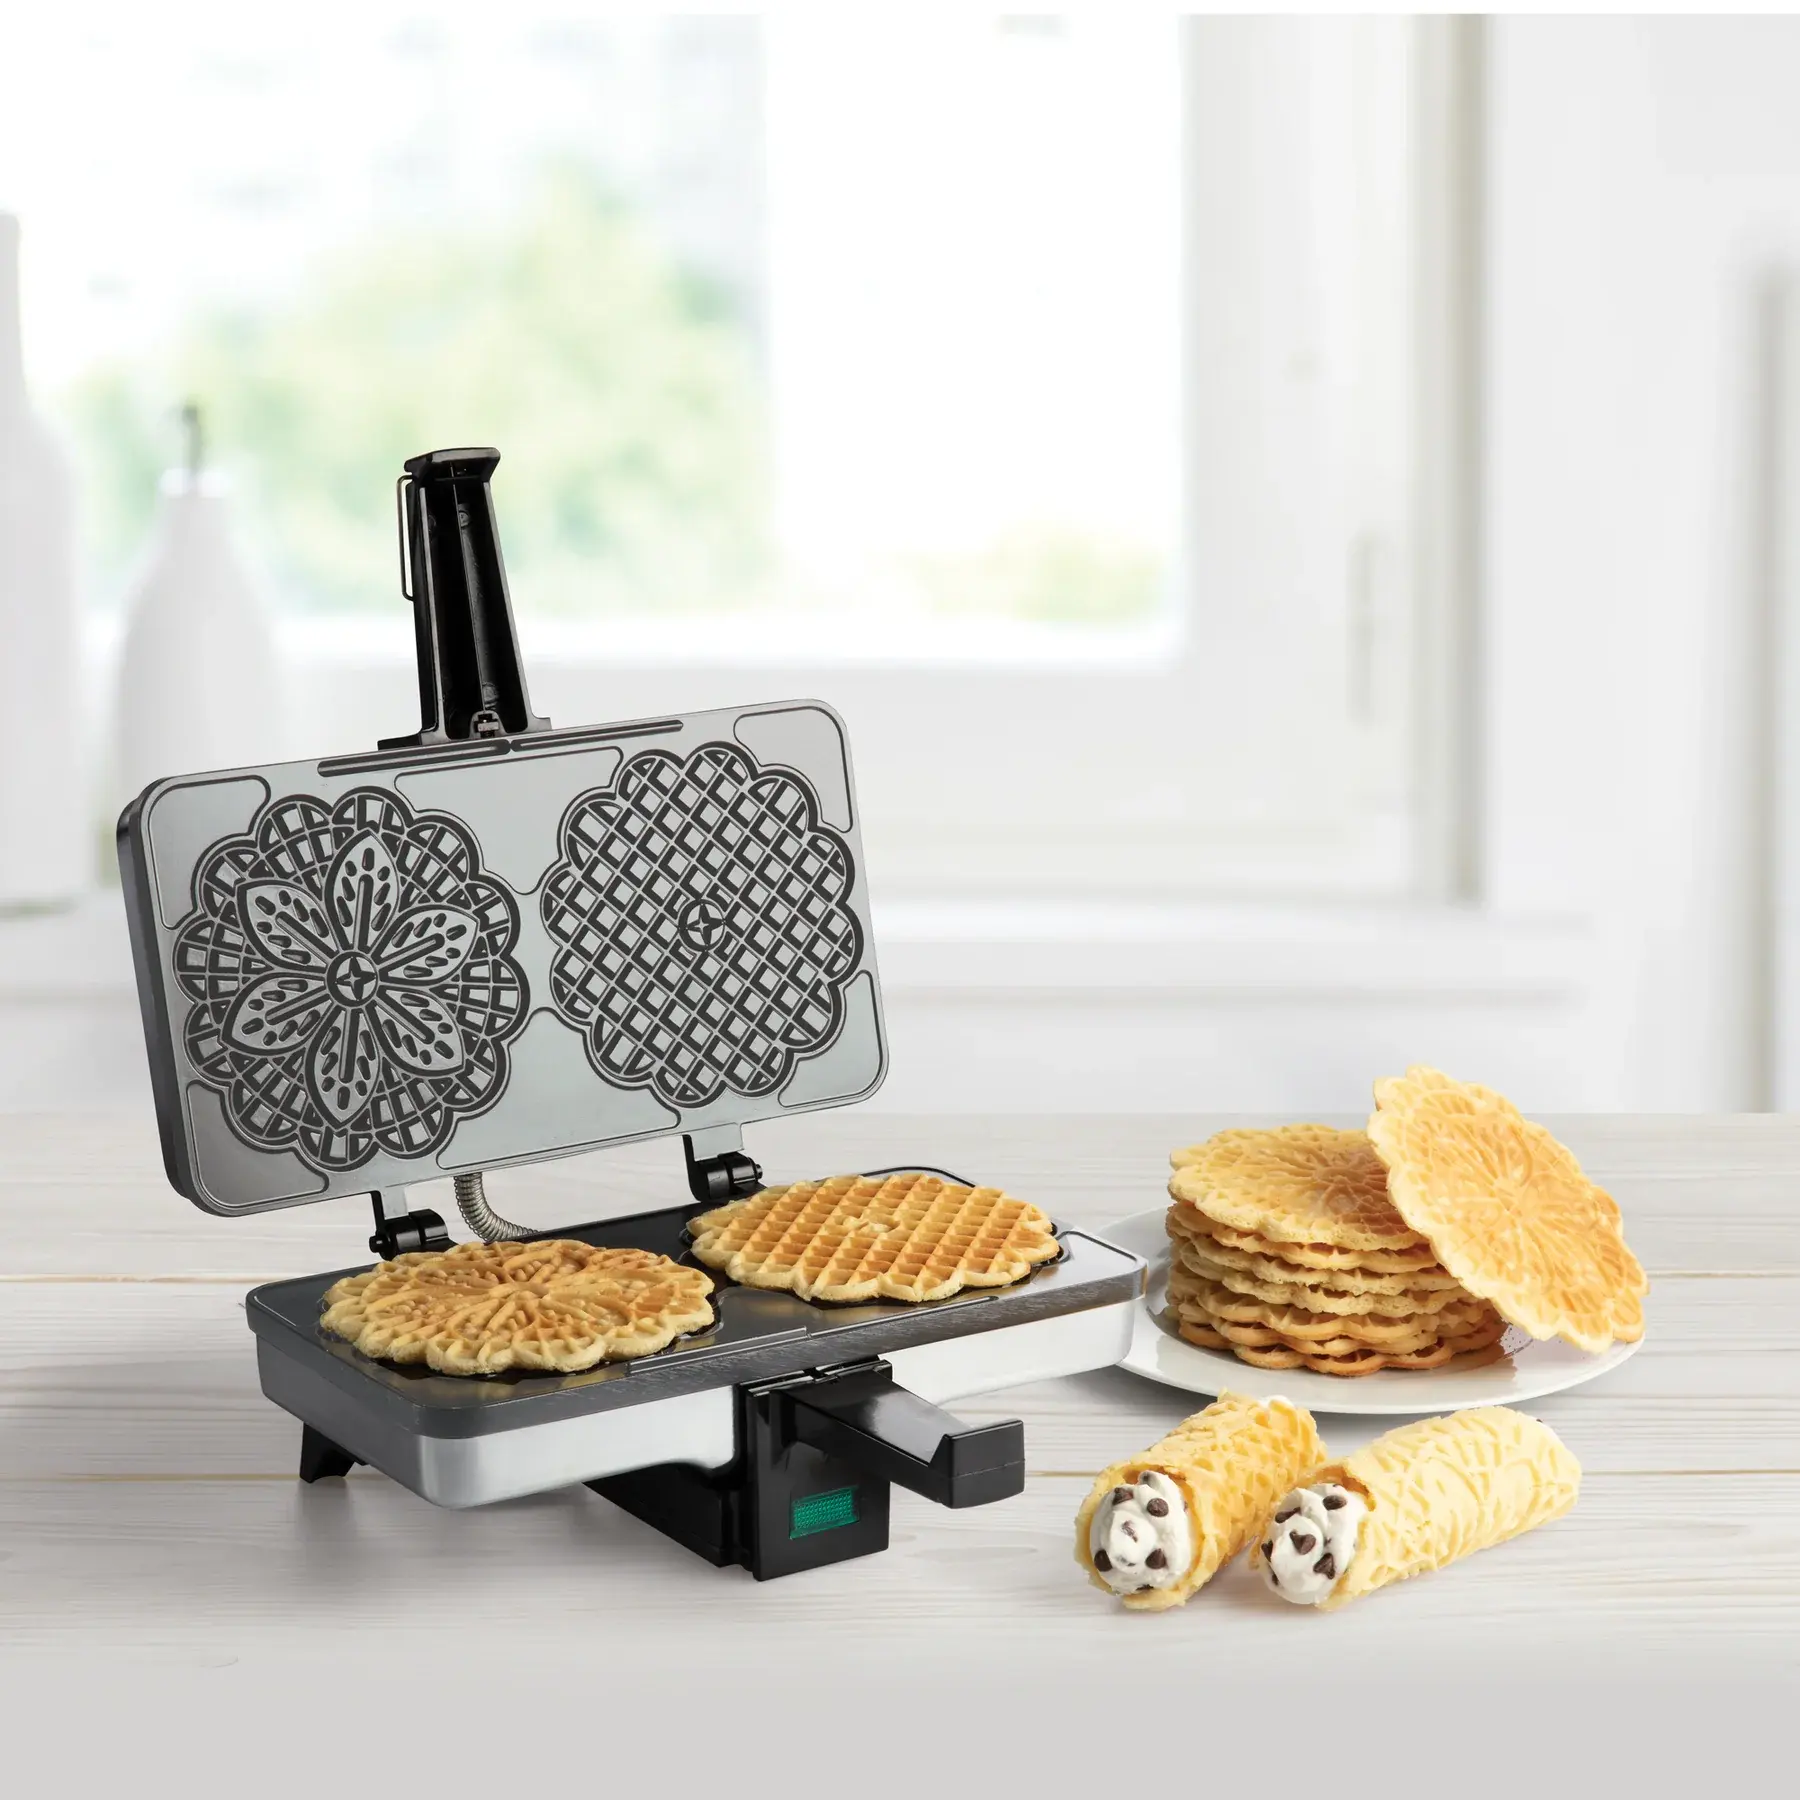 7 Best Pizzelle Makers of 2018 - Reviews of Pizzelle Makers and Irons